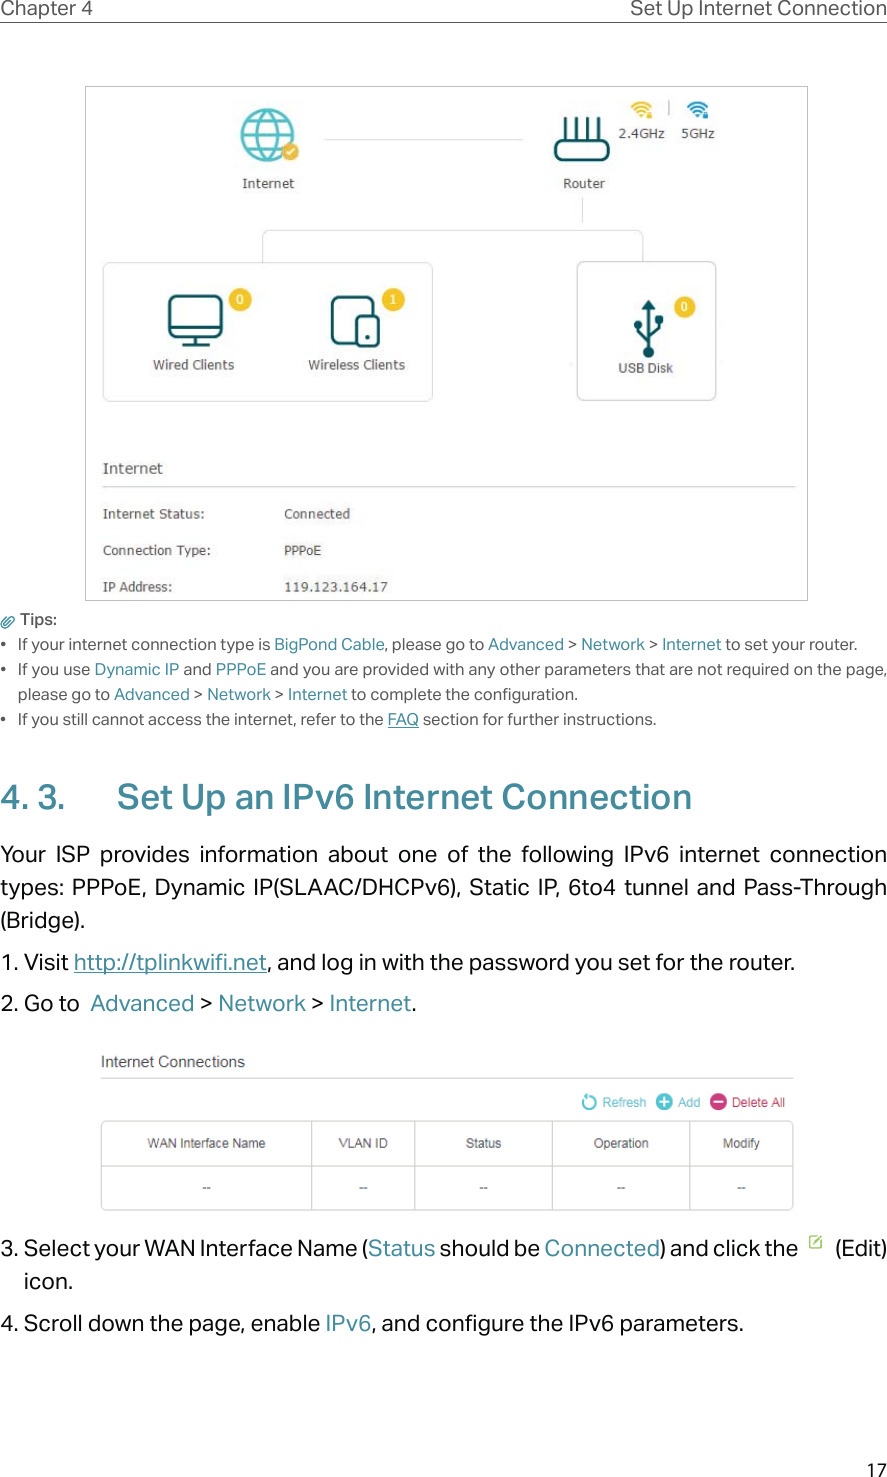 17Chapter 4 Set Up Internet Connection Tips: •  If your internet connection type is BigPond Cable, please go to Advanced &gt; Network &gt; Internet to set your router.• If you use Dynamic IP and PPPoE and you are provided with any other parameters that are not required on the page, please go to Advanced &gt; Network &gt; Internet to complete the configuration.•  If you still cannot access the internet, refer to the FAQ section for further instructions.4. 3.  Set Up an IPv6 Internet ConnectionYour ISP provides information about one of the following IPv6 internet connection types: PPPoE, Dynamic IP(SLAAC/DHCPv6), Static IP, 6to4 tunnel and Pass-Through (Bridge).1. Visit http://tplinkwifi.net, and log in with the password you set for the router.2. Go to  Advanced &gt; Network &gt; Internet. 3. Select your WAN Interface Name (Status should be Connected) and click the    (Edit) icon.4. Scroll down the page, enable IPv6, and configure the IPv6 parameters.